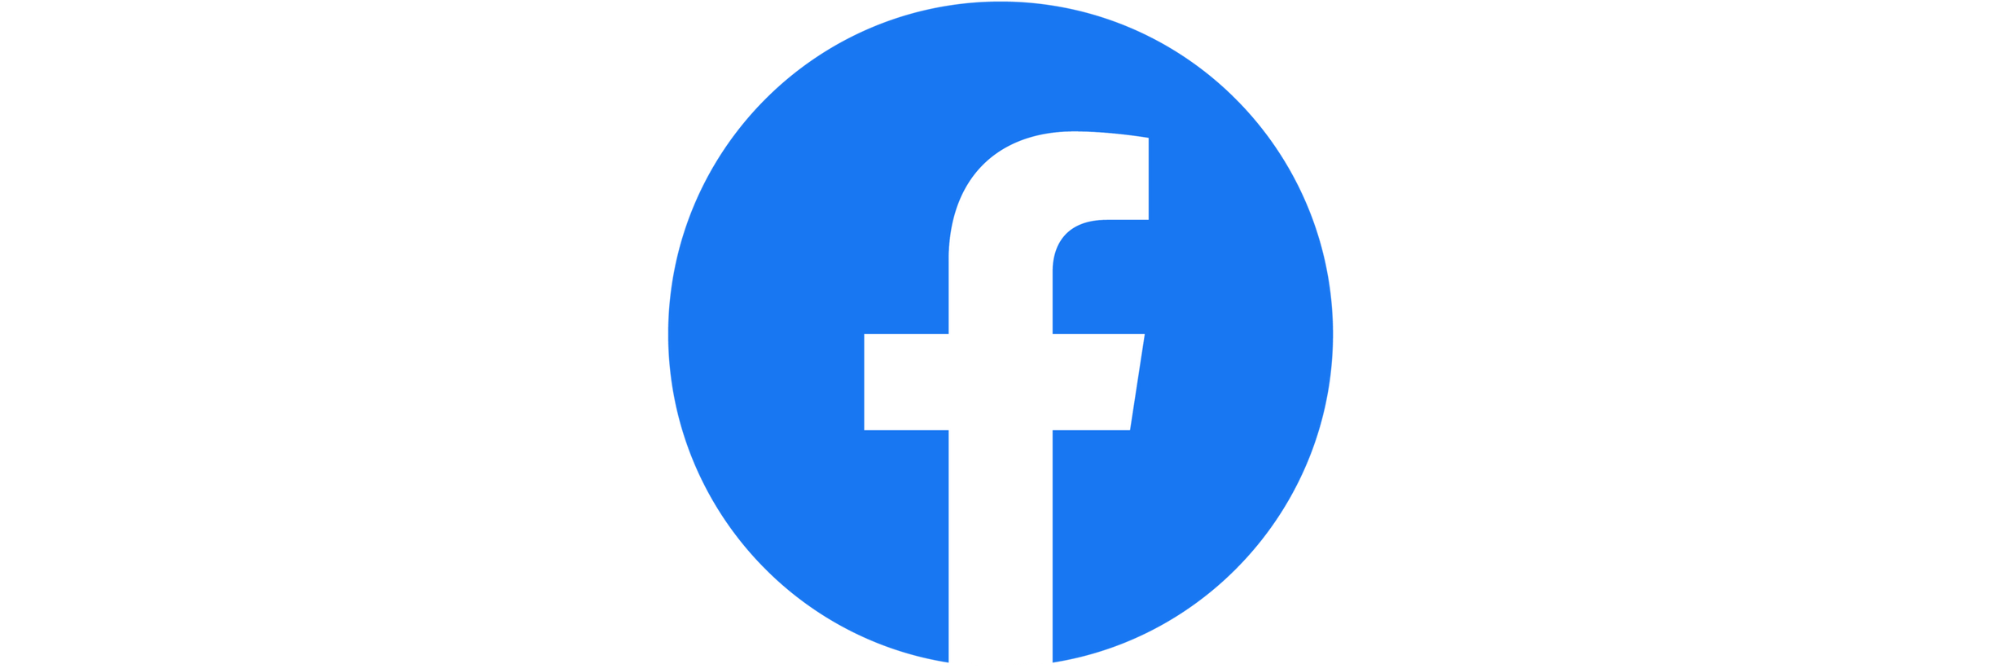 Facebook logo redirecting to Facebook page of the doctoral school